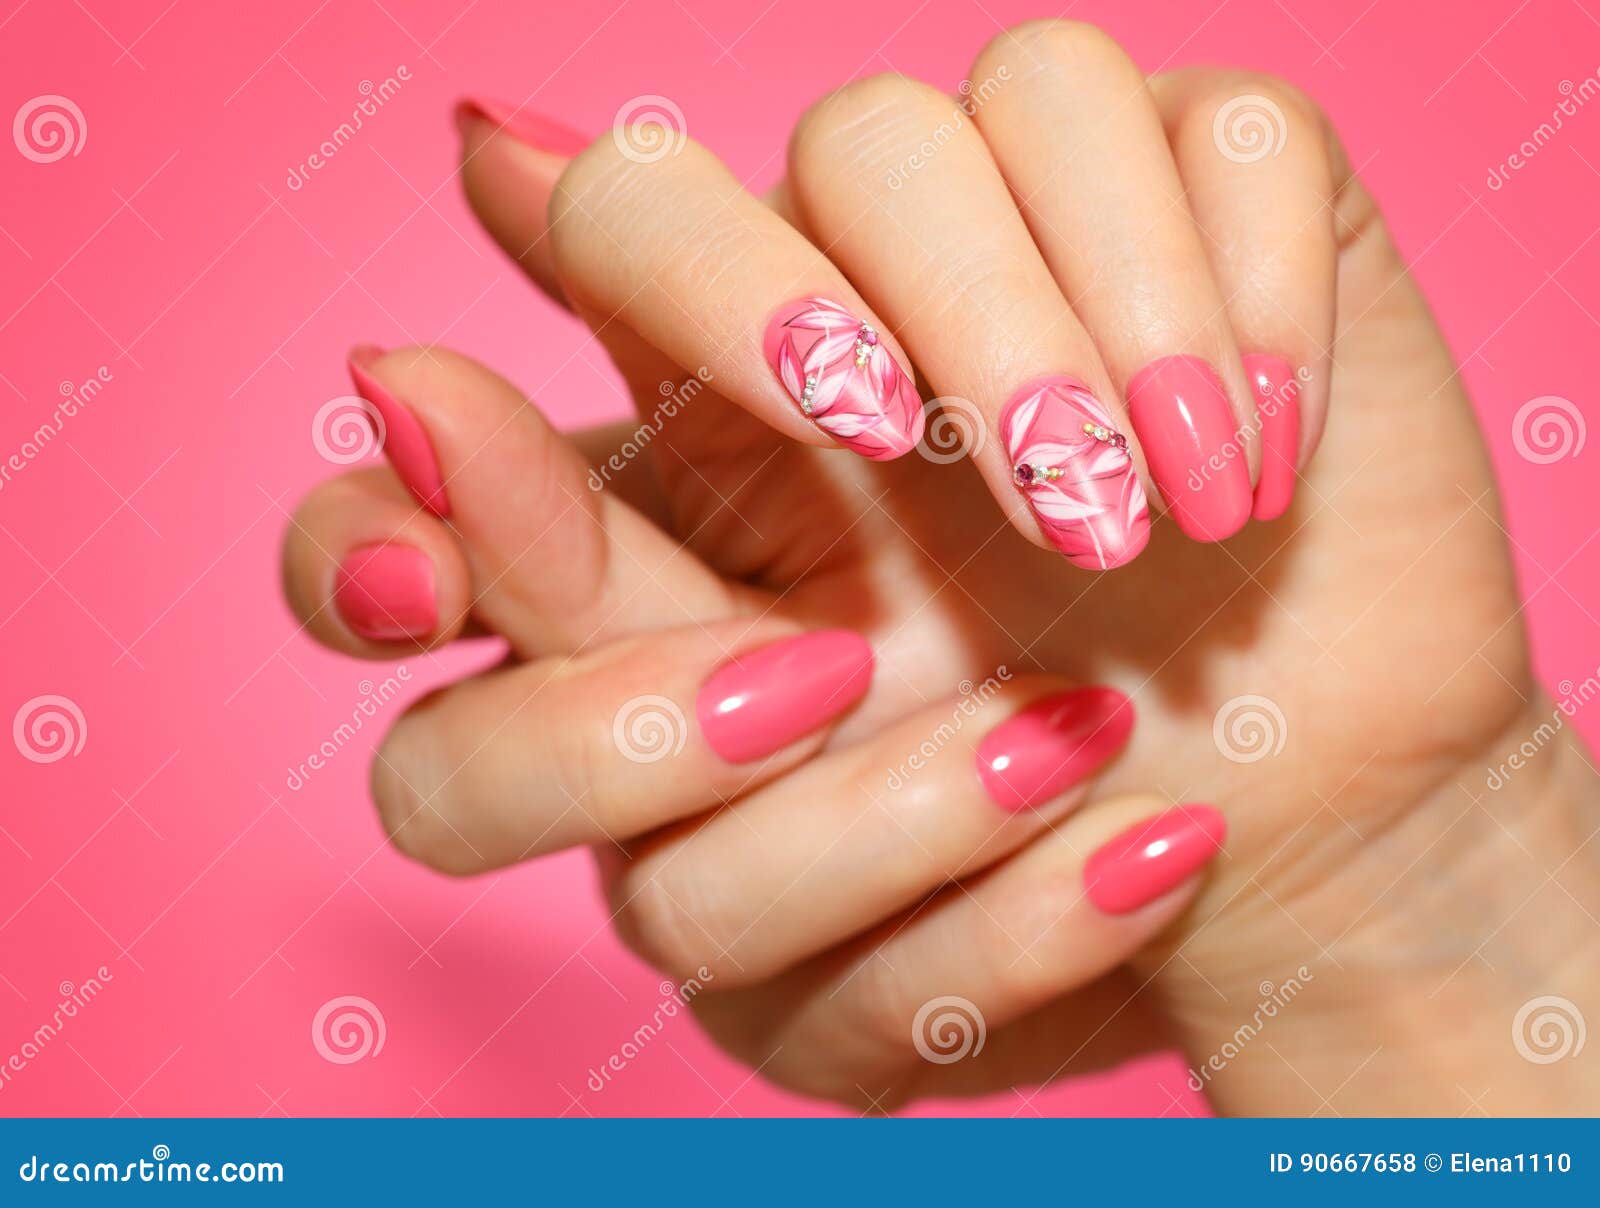 manicured woman`s nails with pink nailart with flowers.